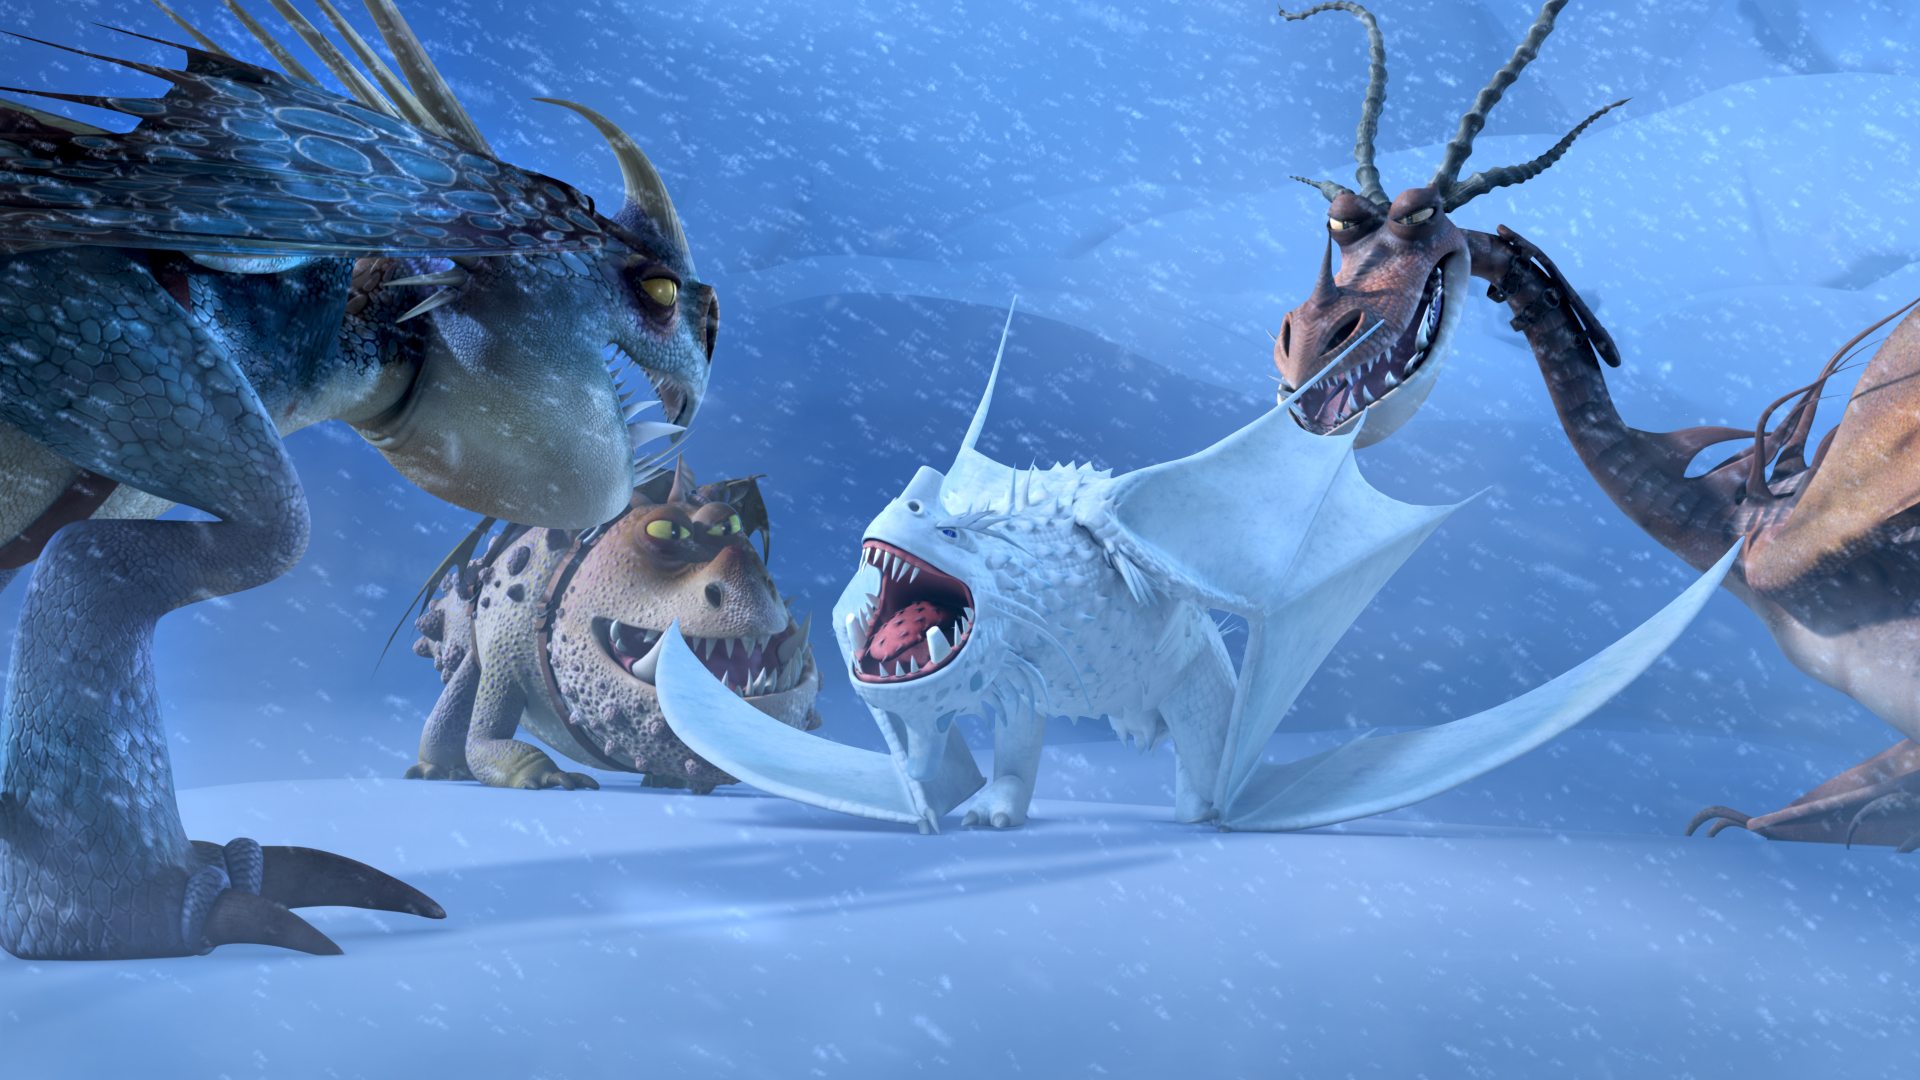 Dragons: Race to the Edge, TV Shows